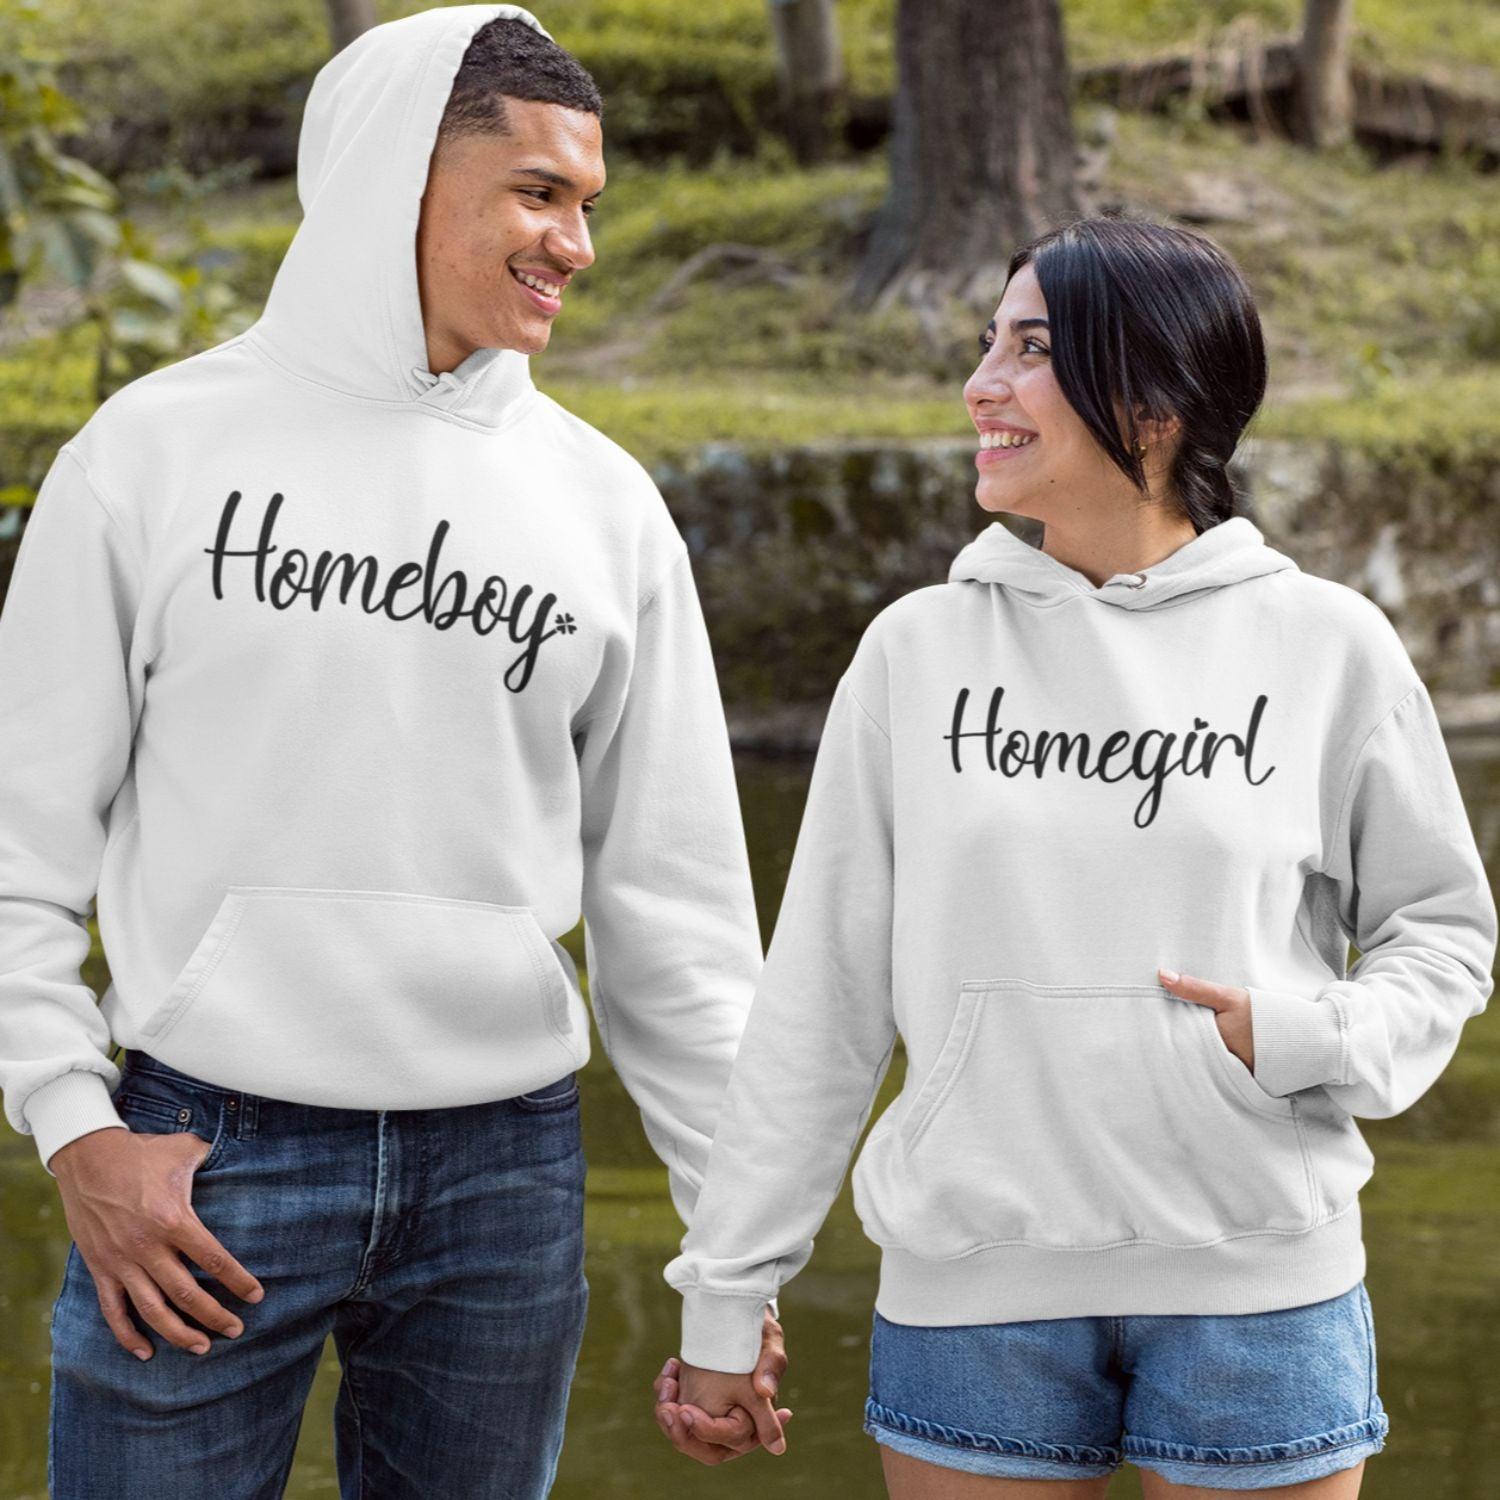 Chill Outfit Matching Set for Homegirl & Homeboy – Perfect Duo! - 4Lovebirds